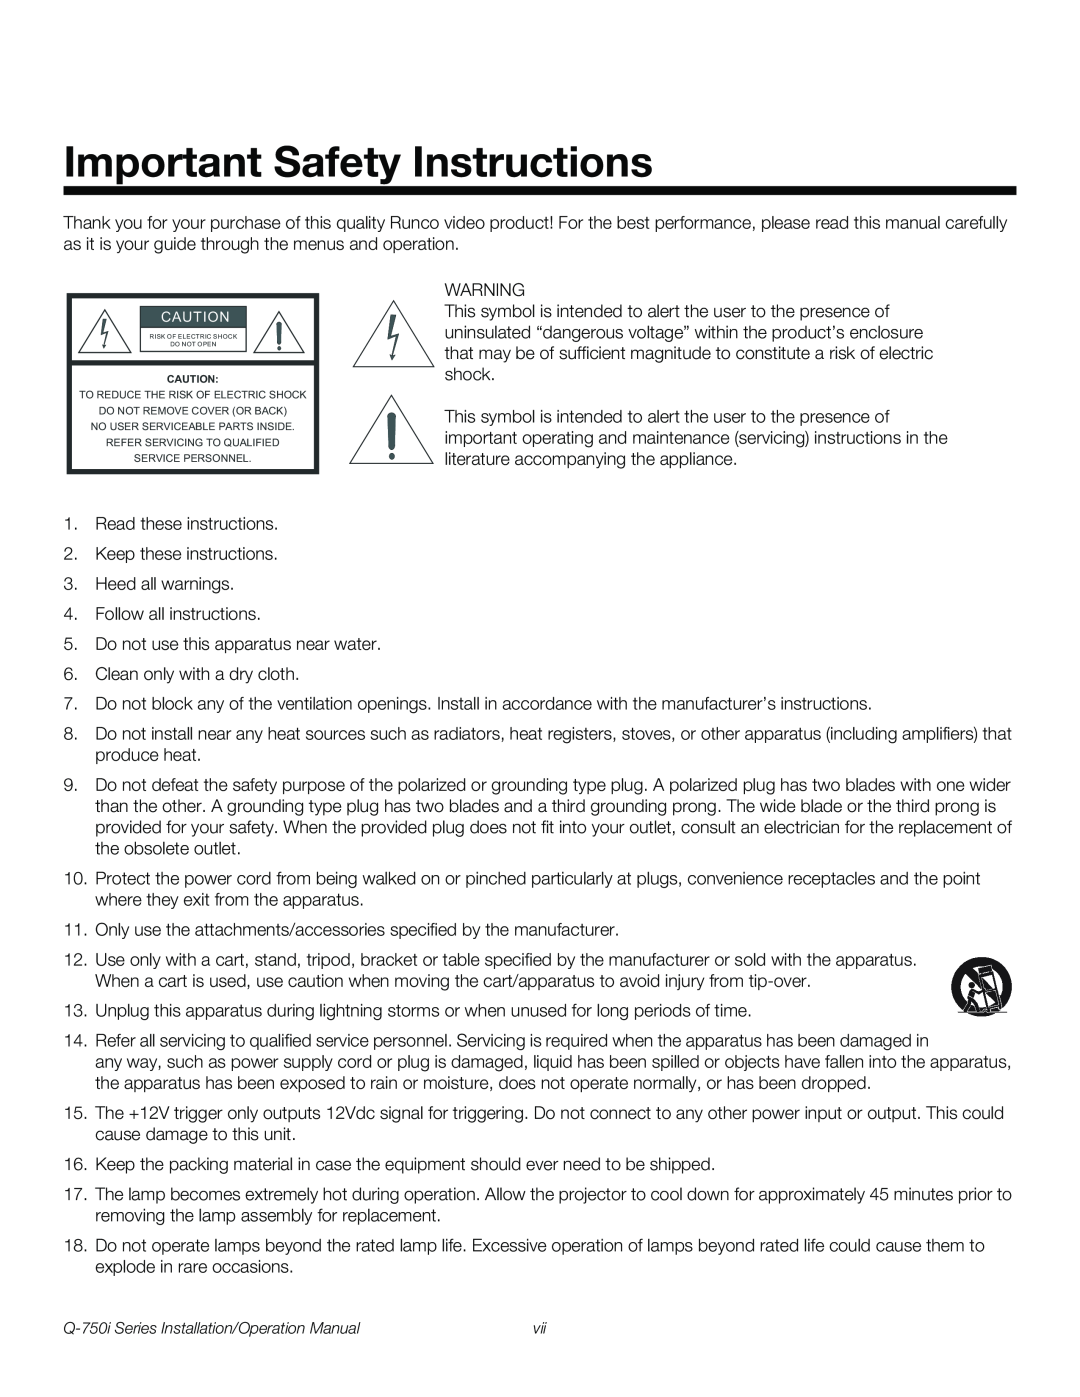 Runco Q-750I operation manual Important Safety Instructions 